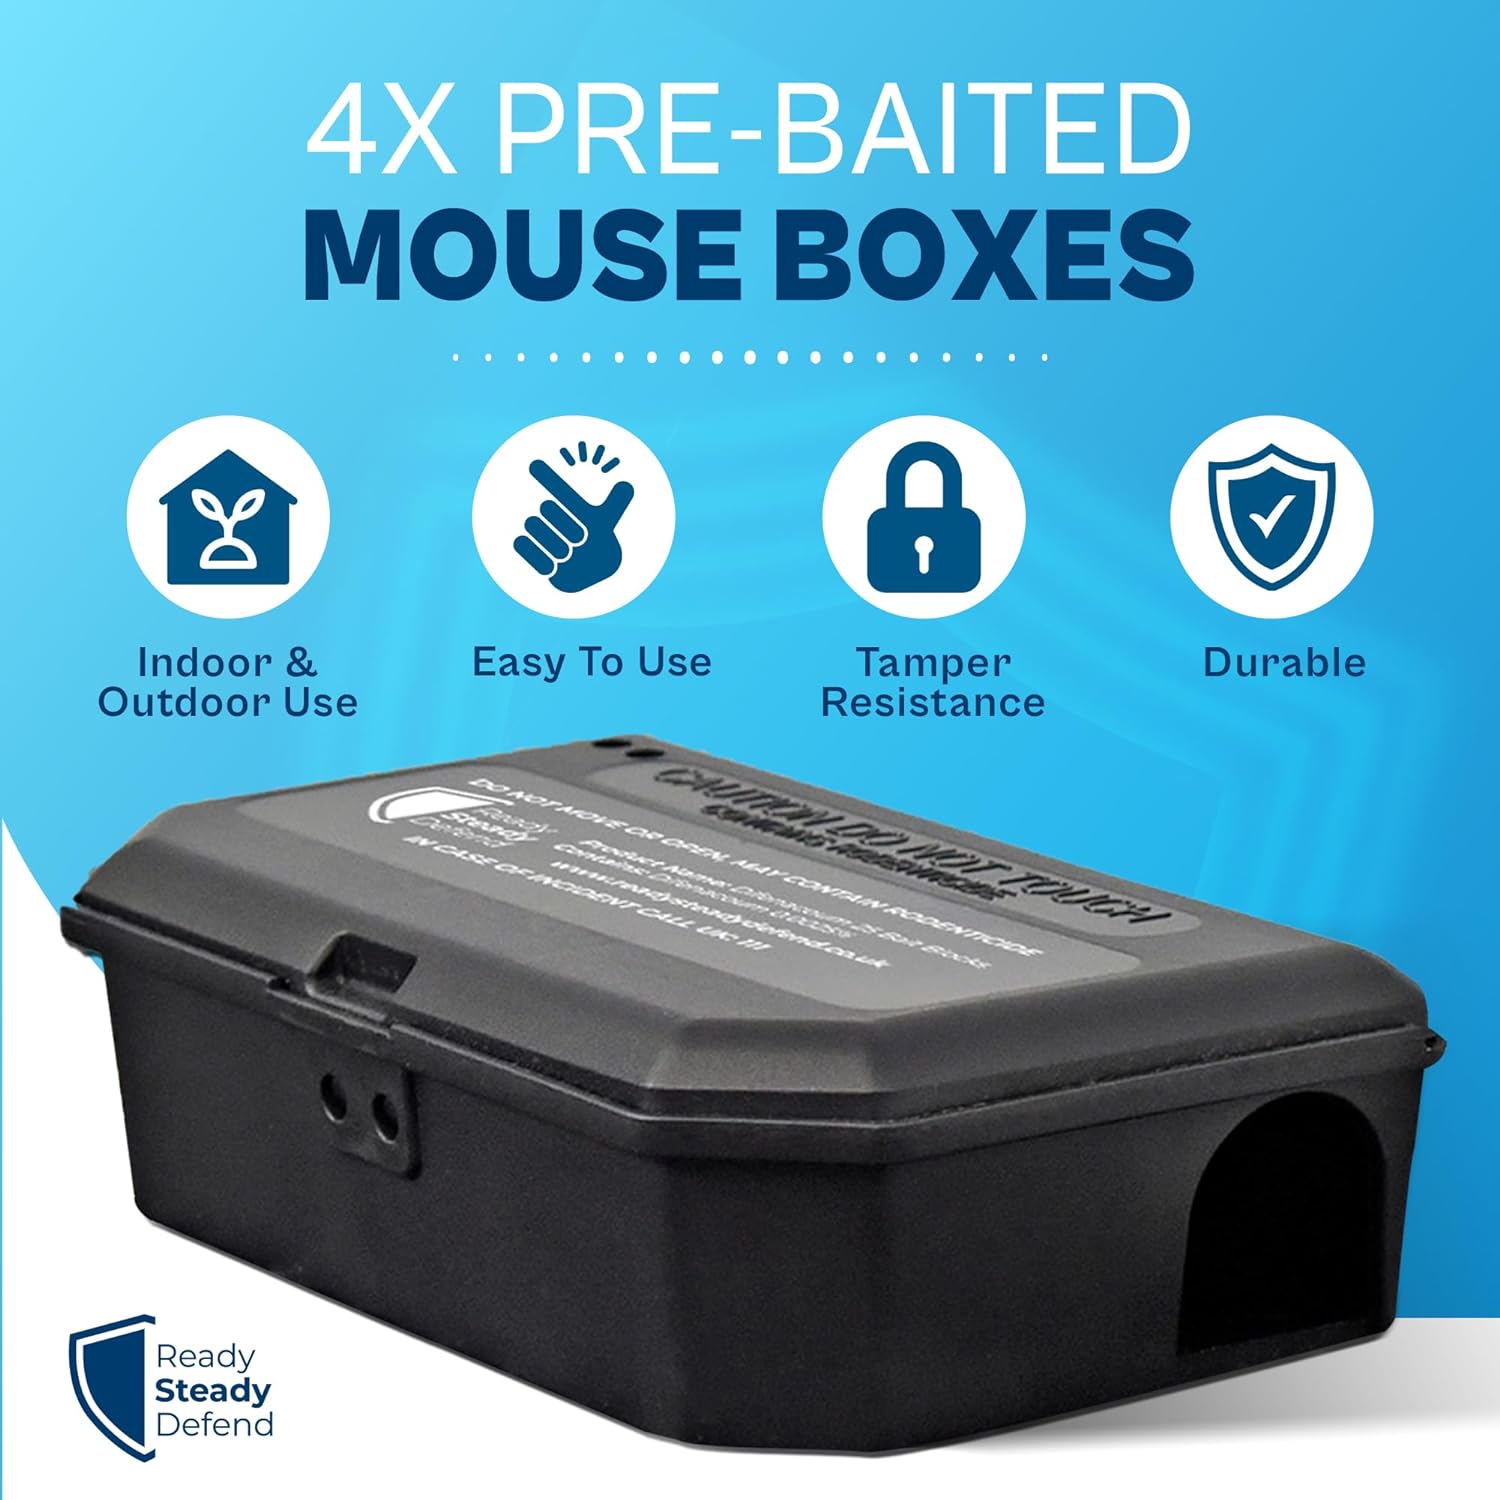 Pre-Baited Mouse Boxes (Pack of 4)